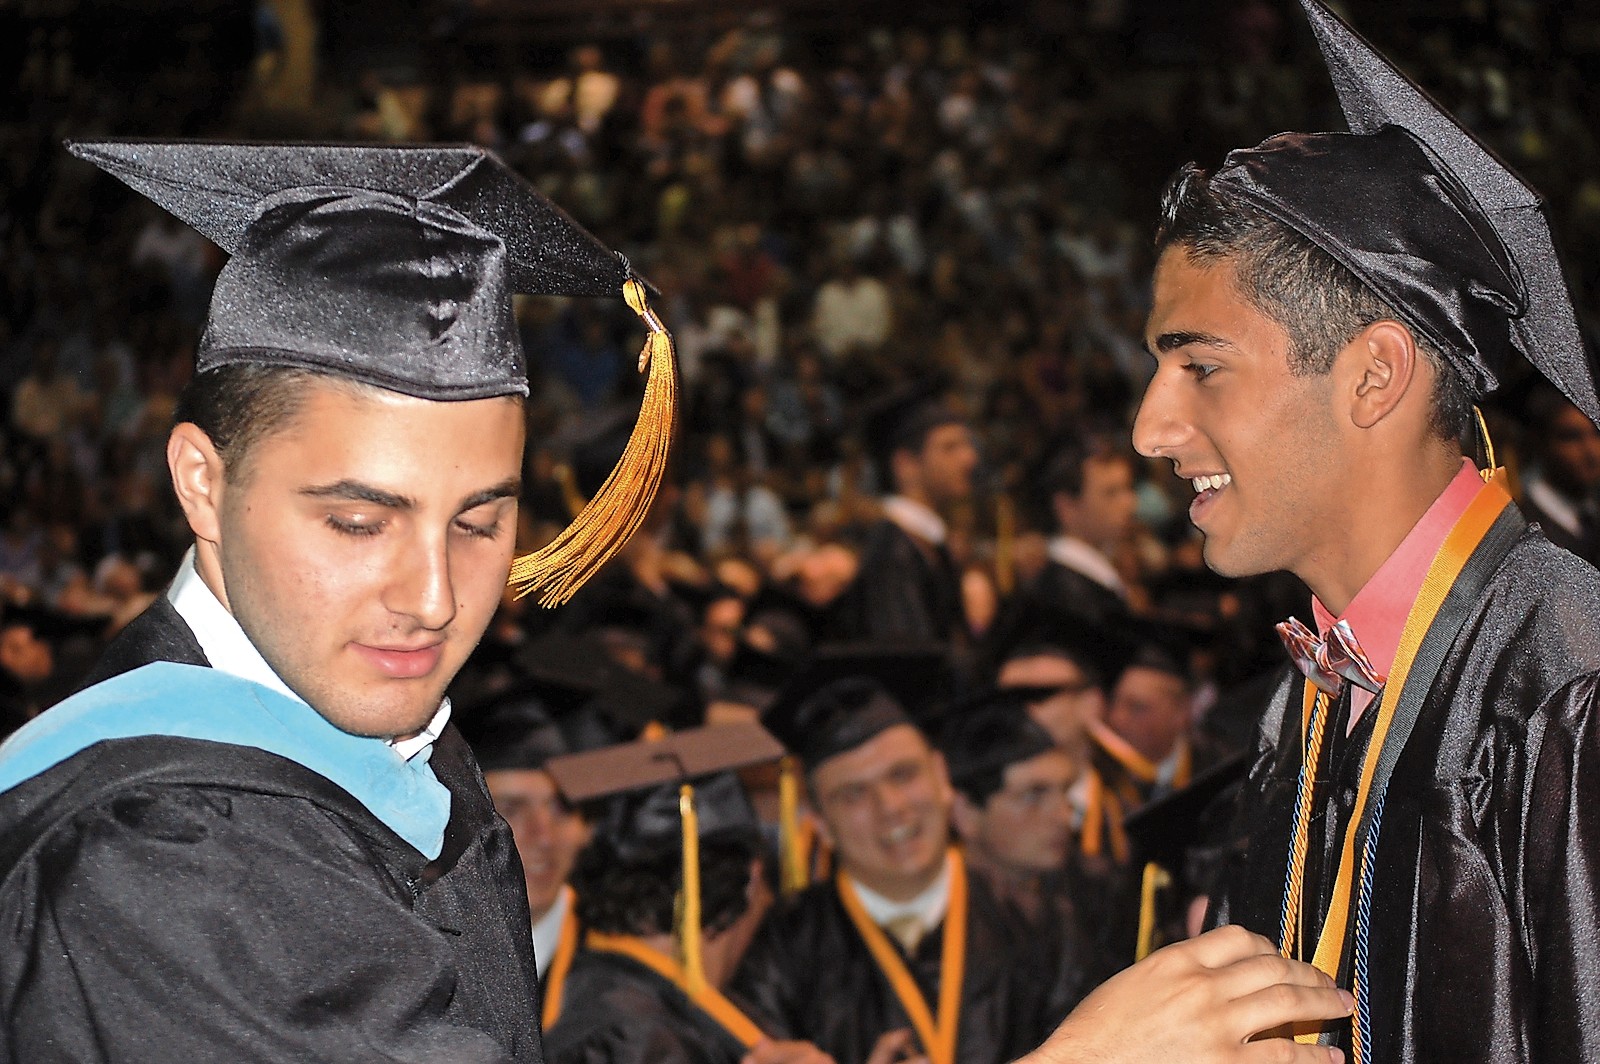 Board of Education Trustee Peter Mountanos, left, presented a graduation medal to his brother, Chris.